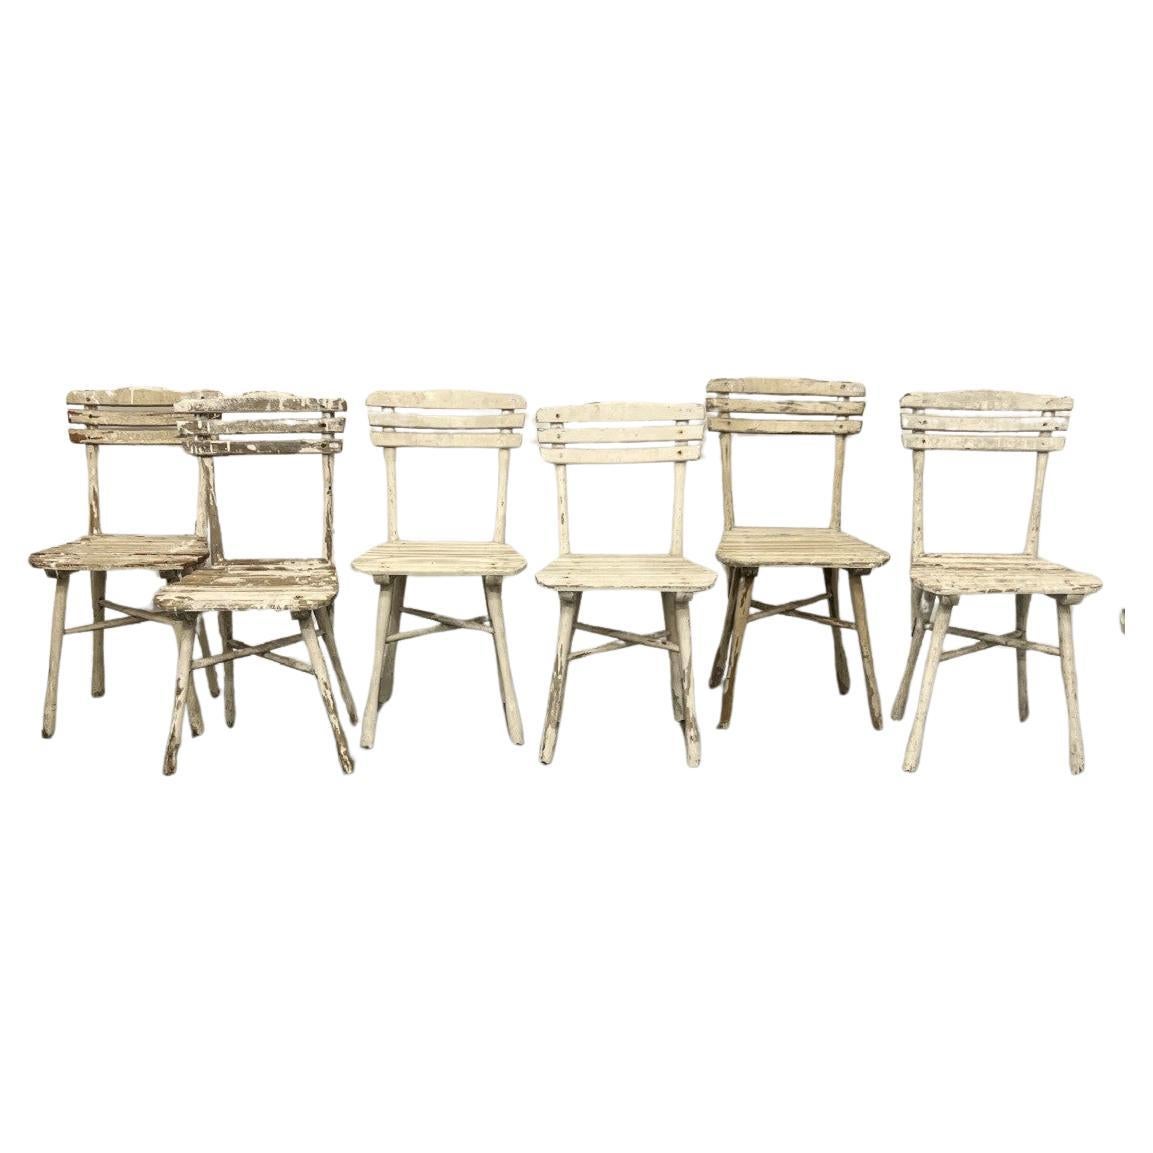 series of 6 garden or veranda chairs in painted wood circa 1900/1930 Thonet  For Sale